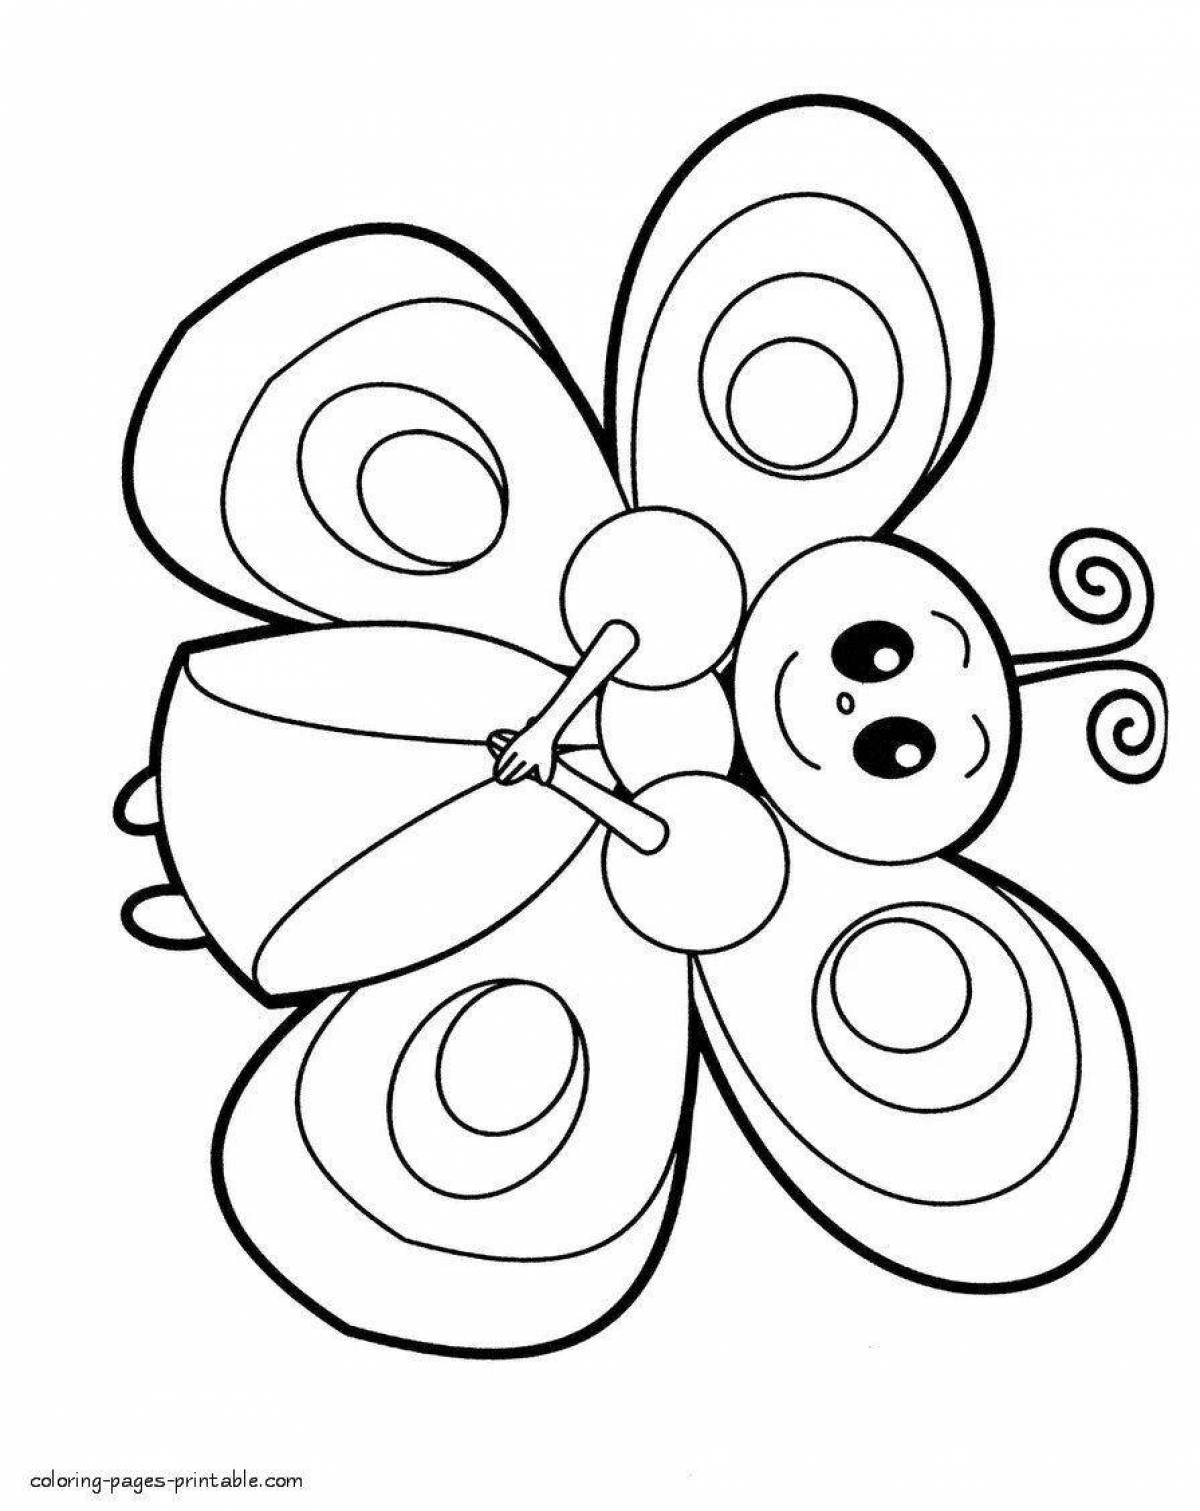 Coloring butterflies for kids